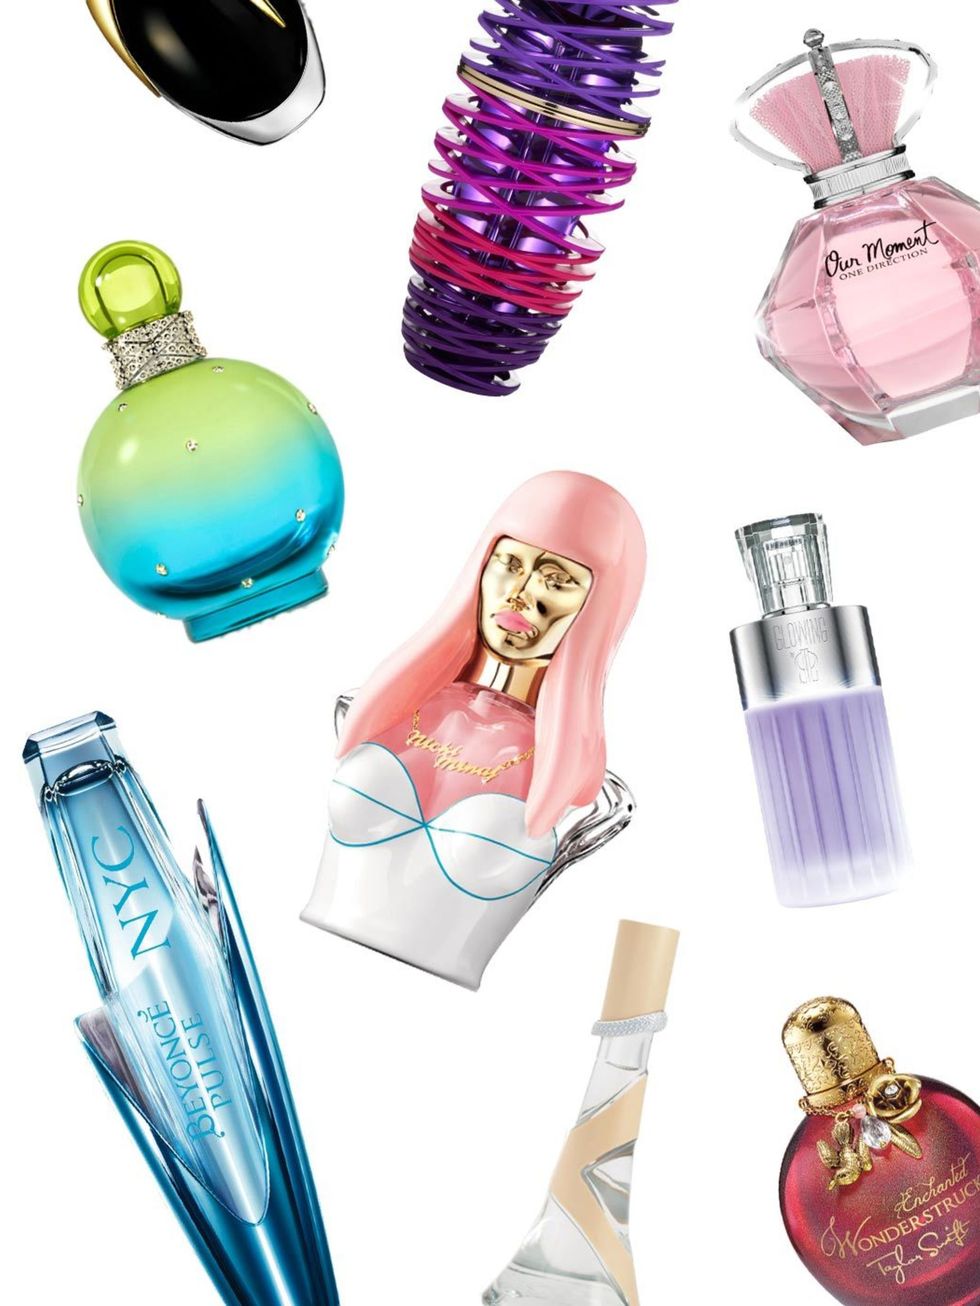 <p>From eye catching bottles to offbeat notes, weve had a real variety of celebrity scents launch over the years. Now One Direction has entered the fragrance world with Our Moment. So, we thought what better time to round up the biggest A-list fragranc